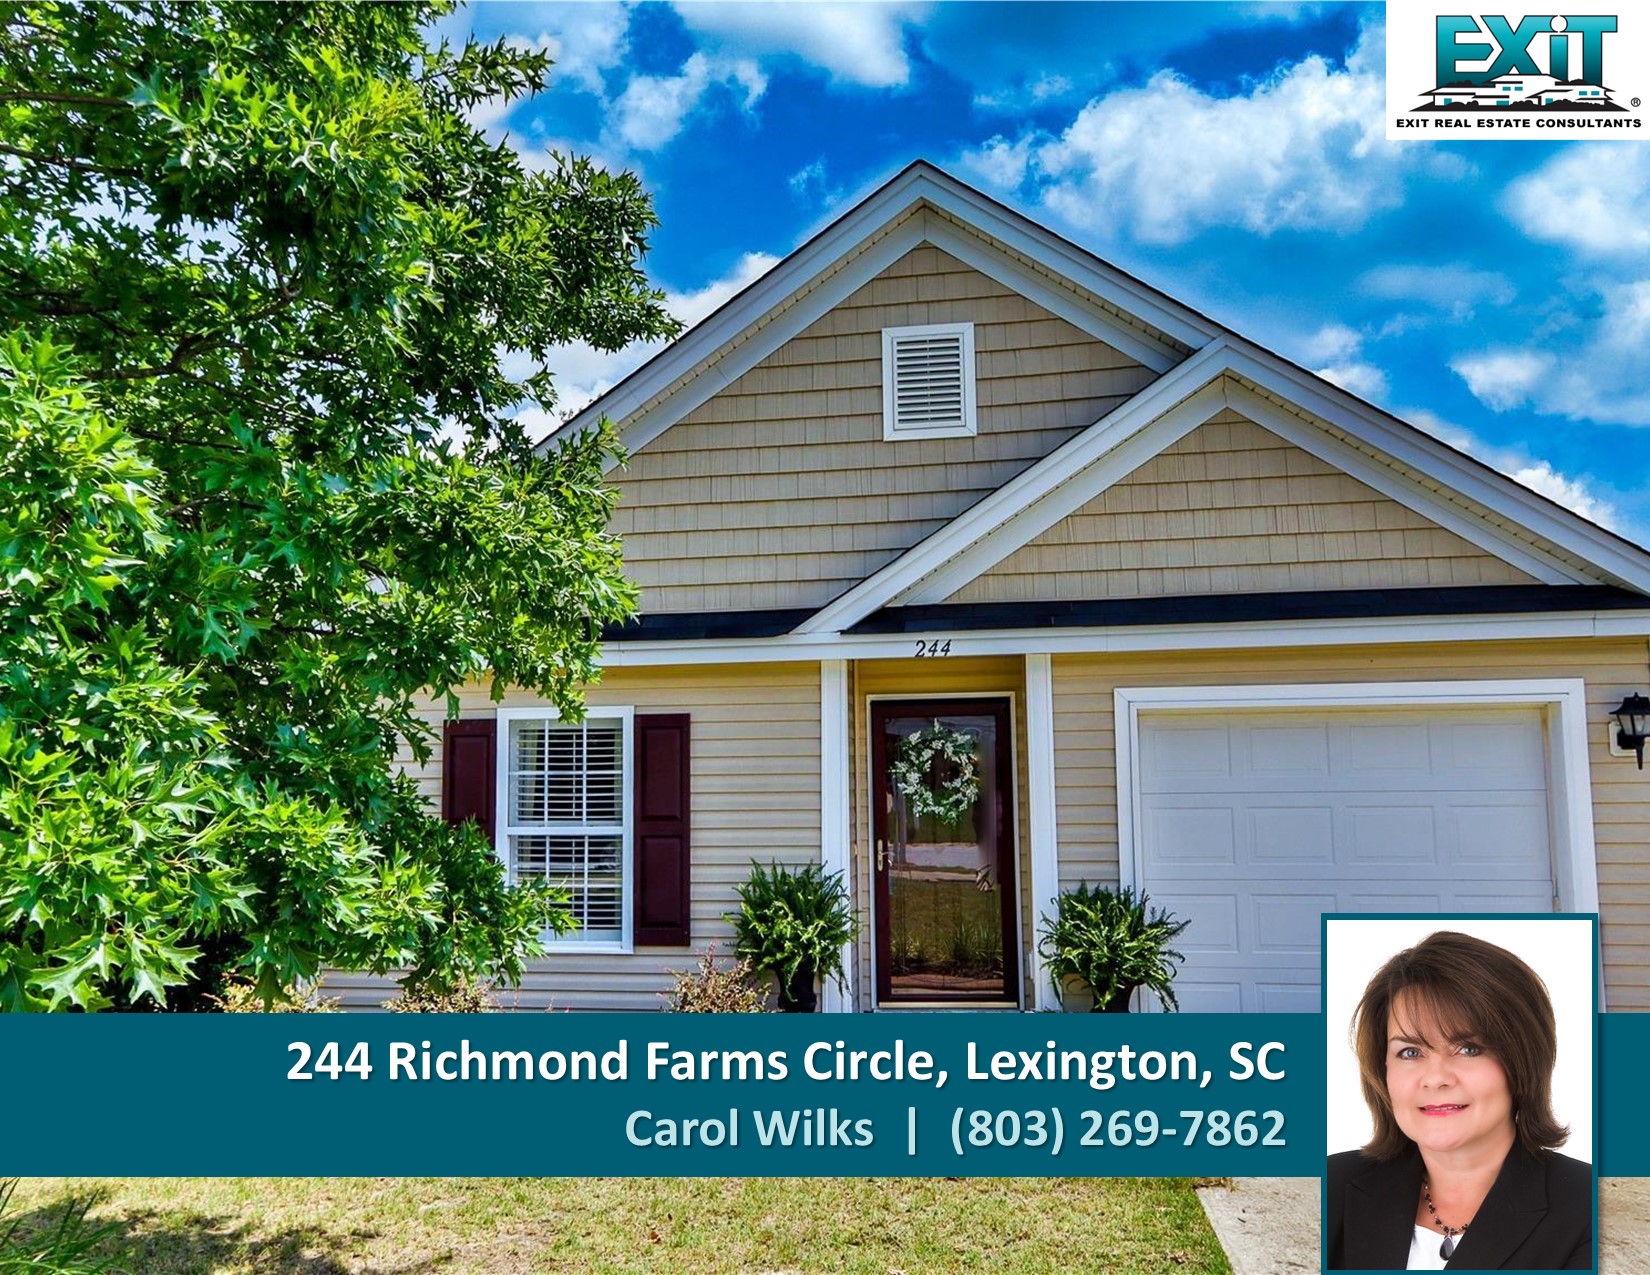 Just listed in Richmond Farms